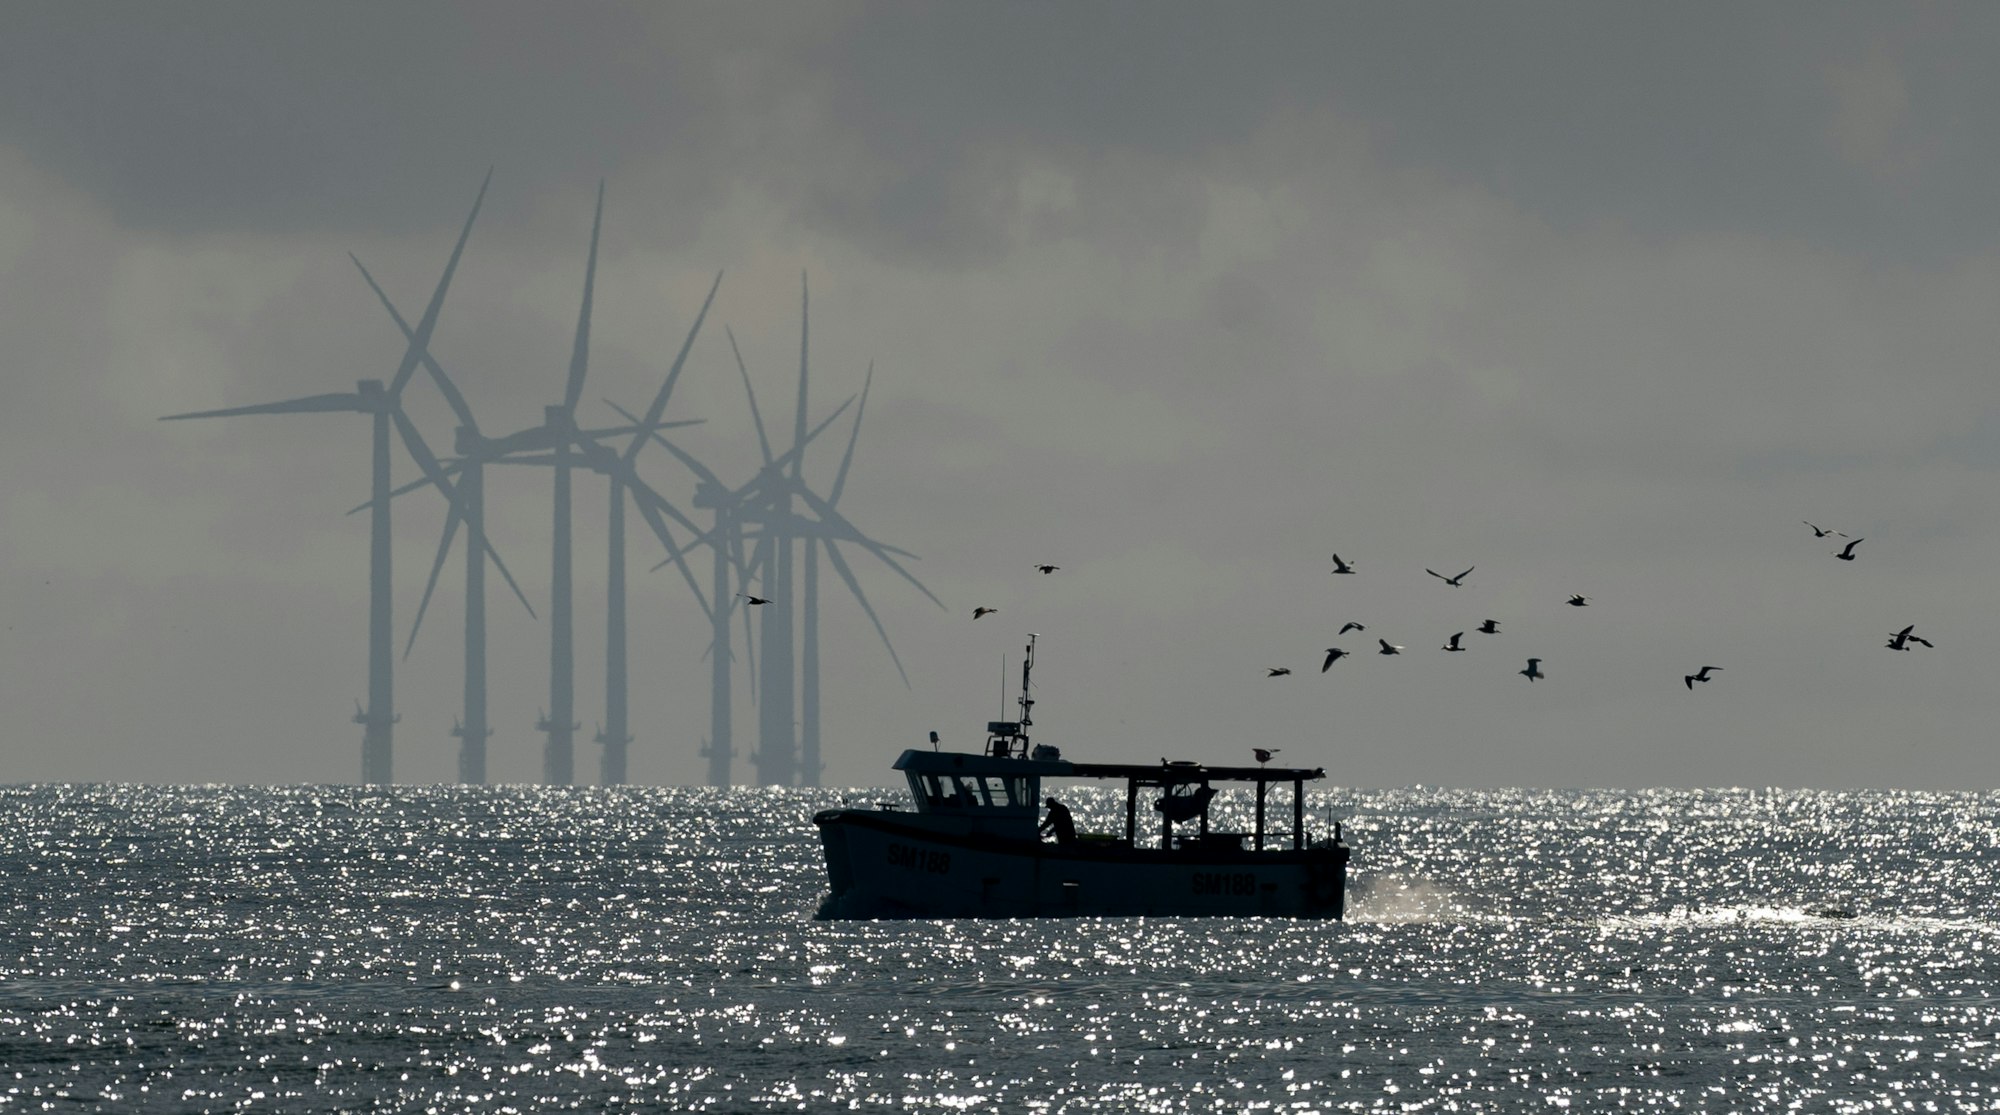 A boat in the foreground is sillouhetted against an offshore wind far in the background.